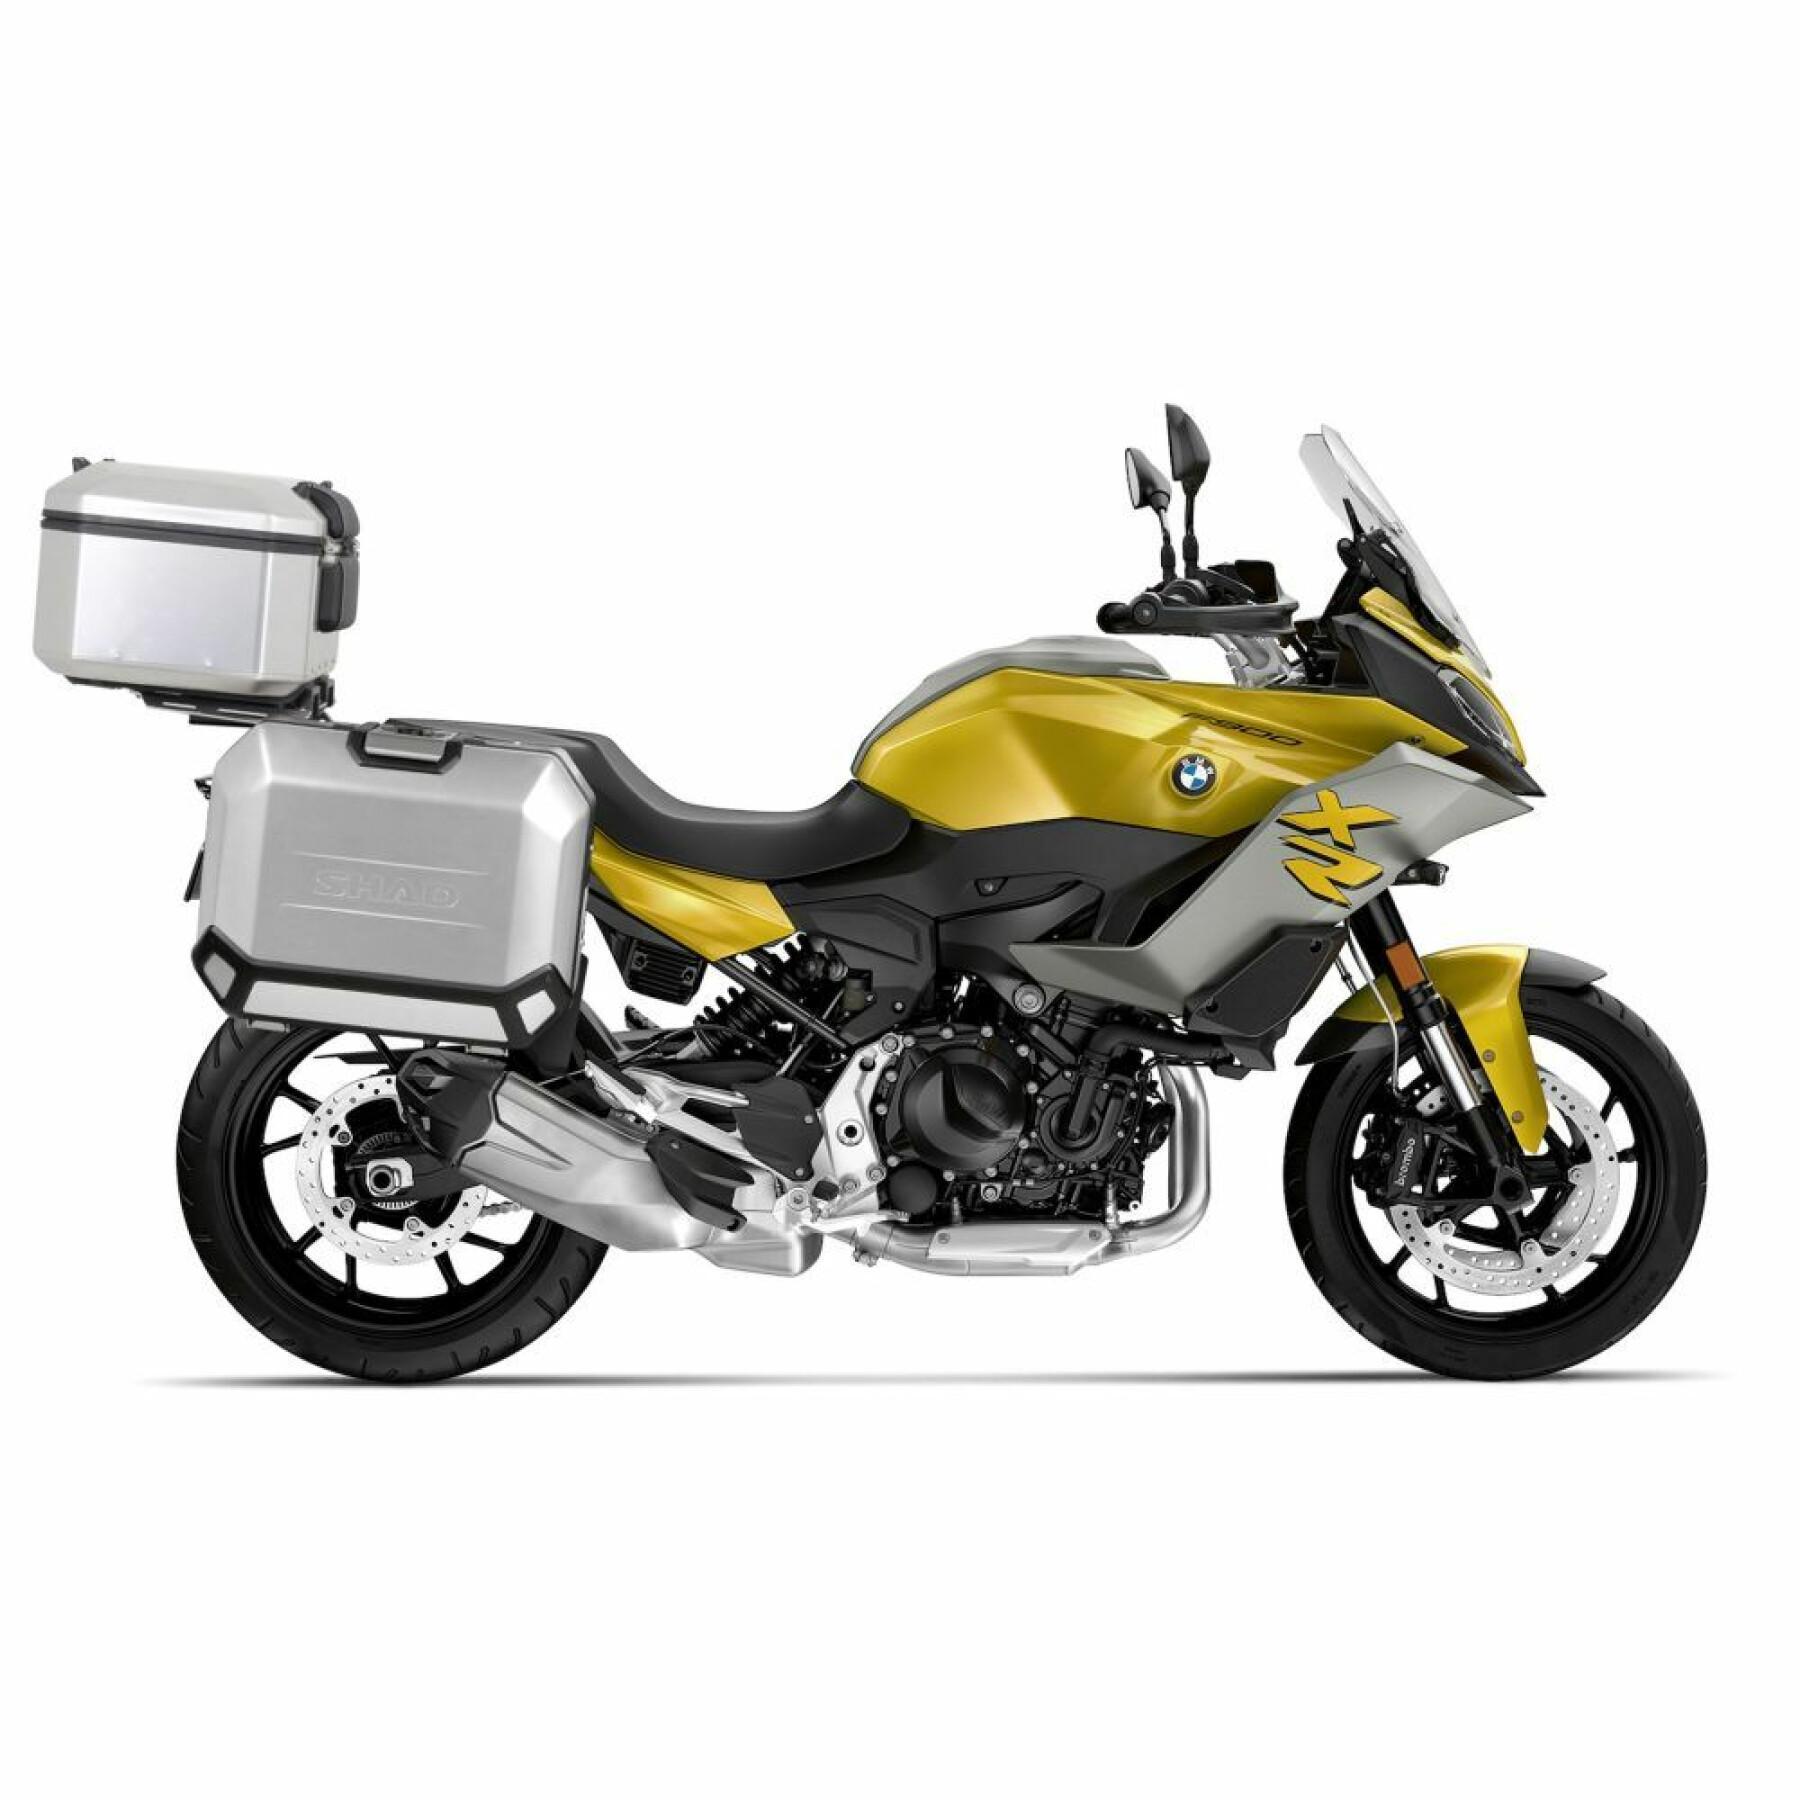 Side case support Shad 4P System Bmw F900R/Xr